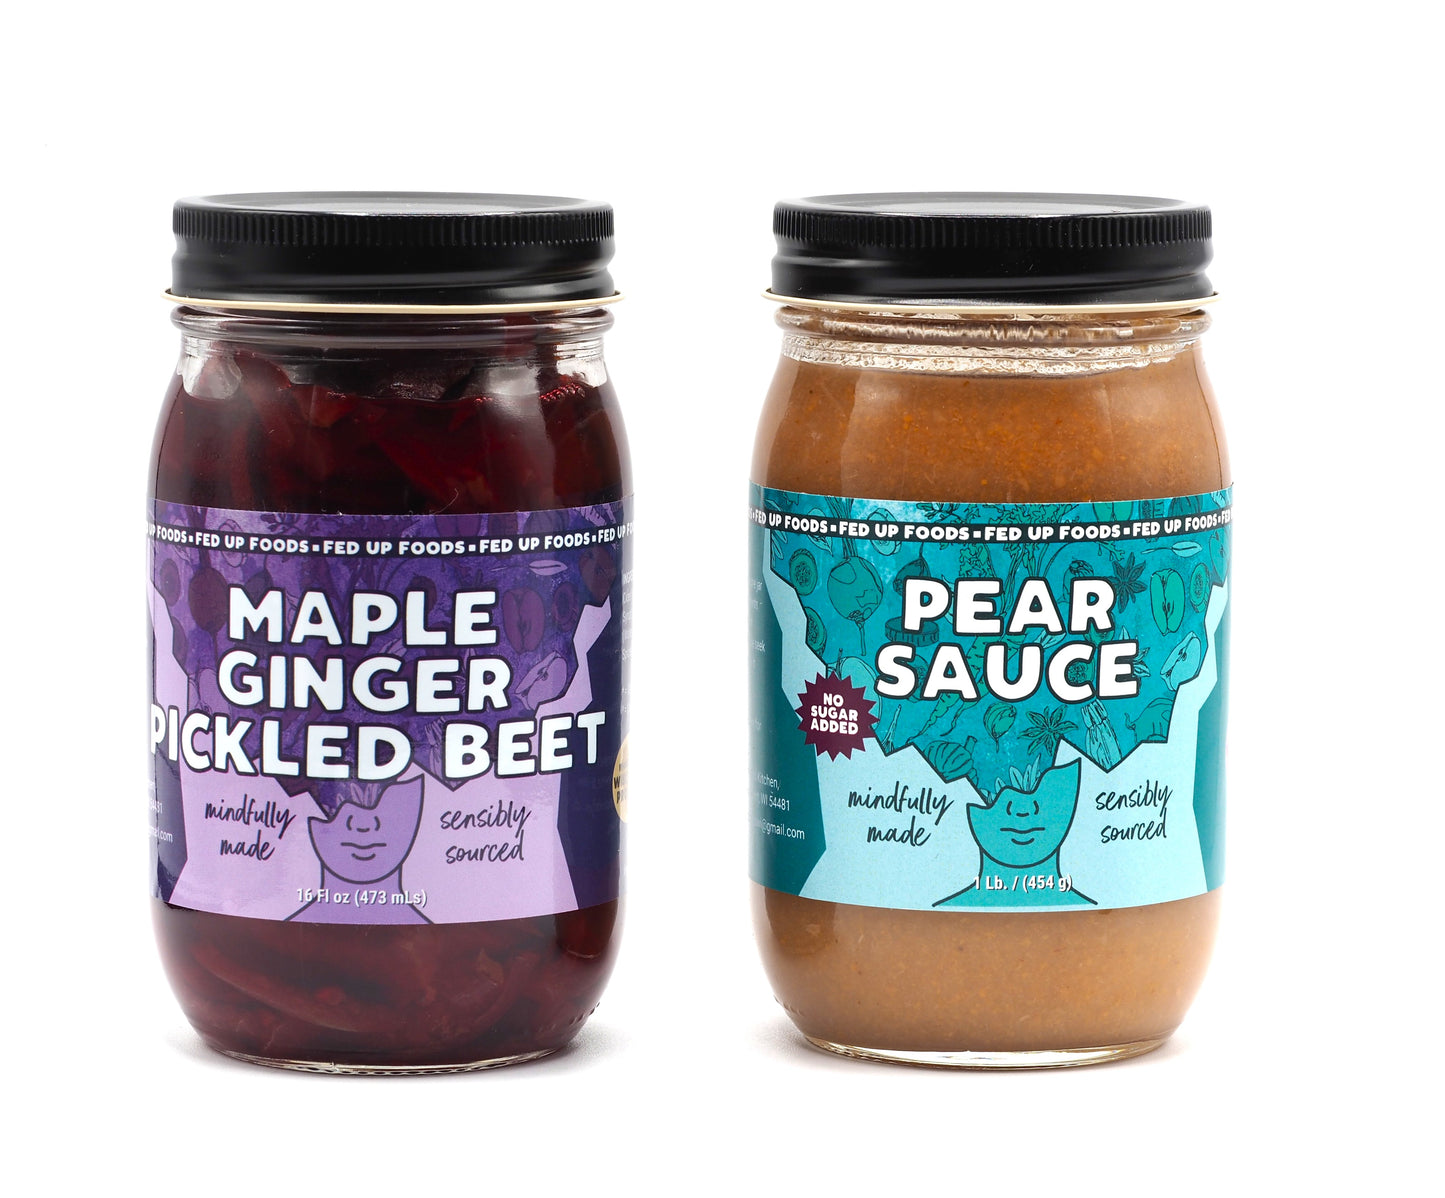 Fed Up Foods Maple Ginger Pickled Beet and Pear Sauce in a 2 pack Build your own variety pack